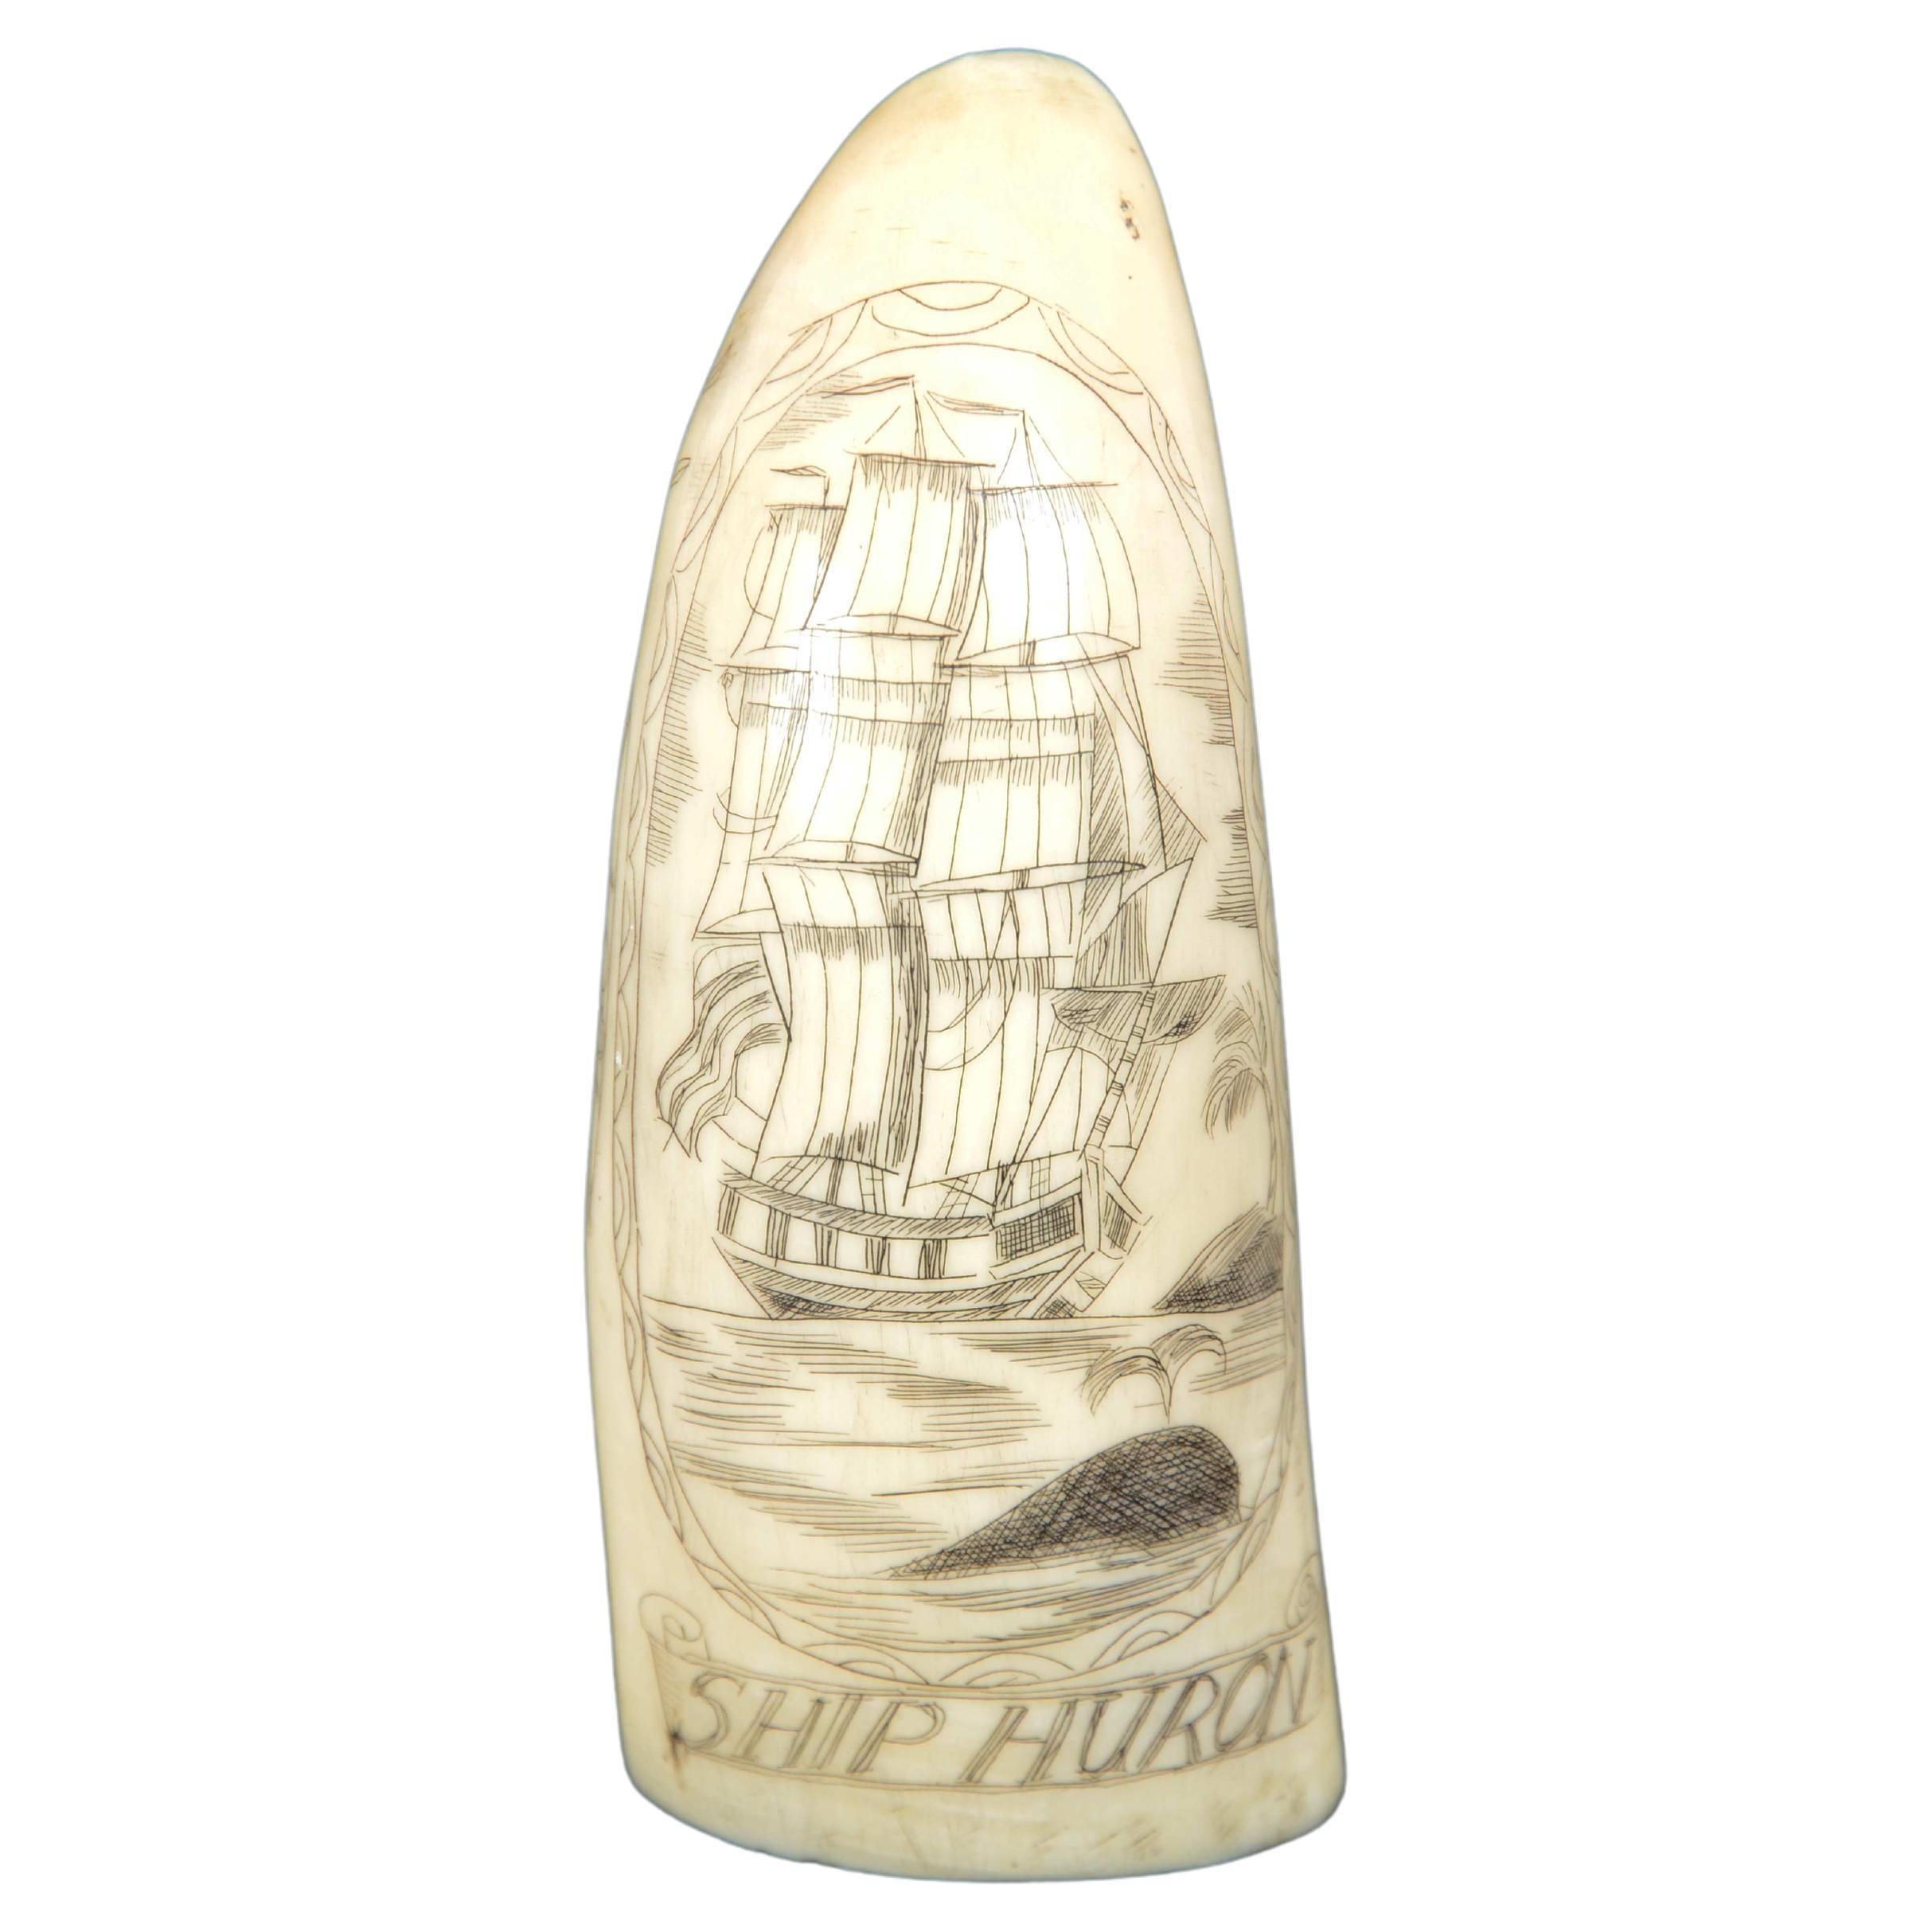 Scrimshaw of a vertically engraved whale tooth Ship Huron dated 1839 cm 9 For Sale